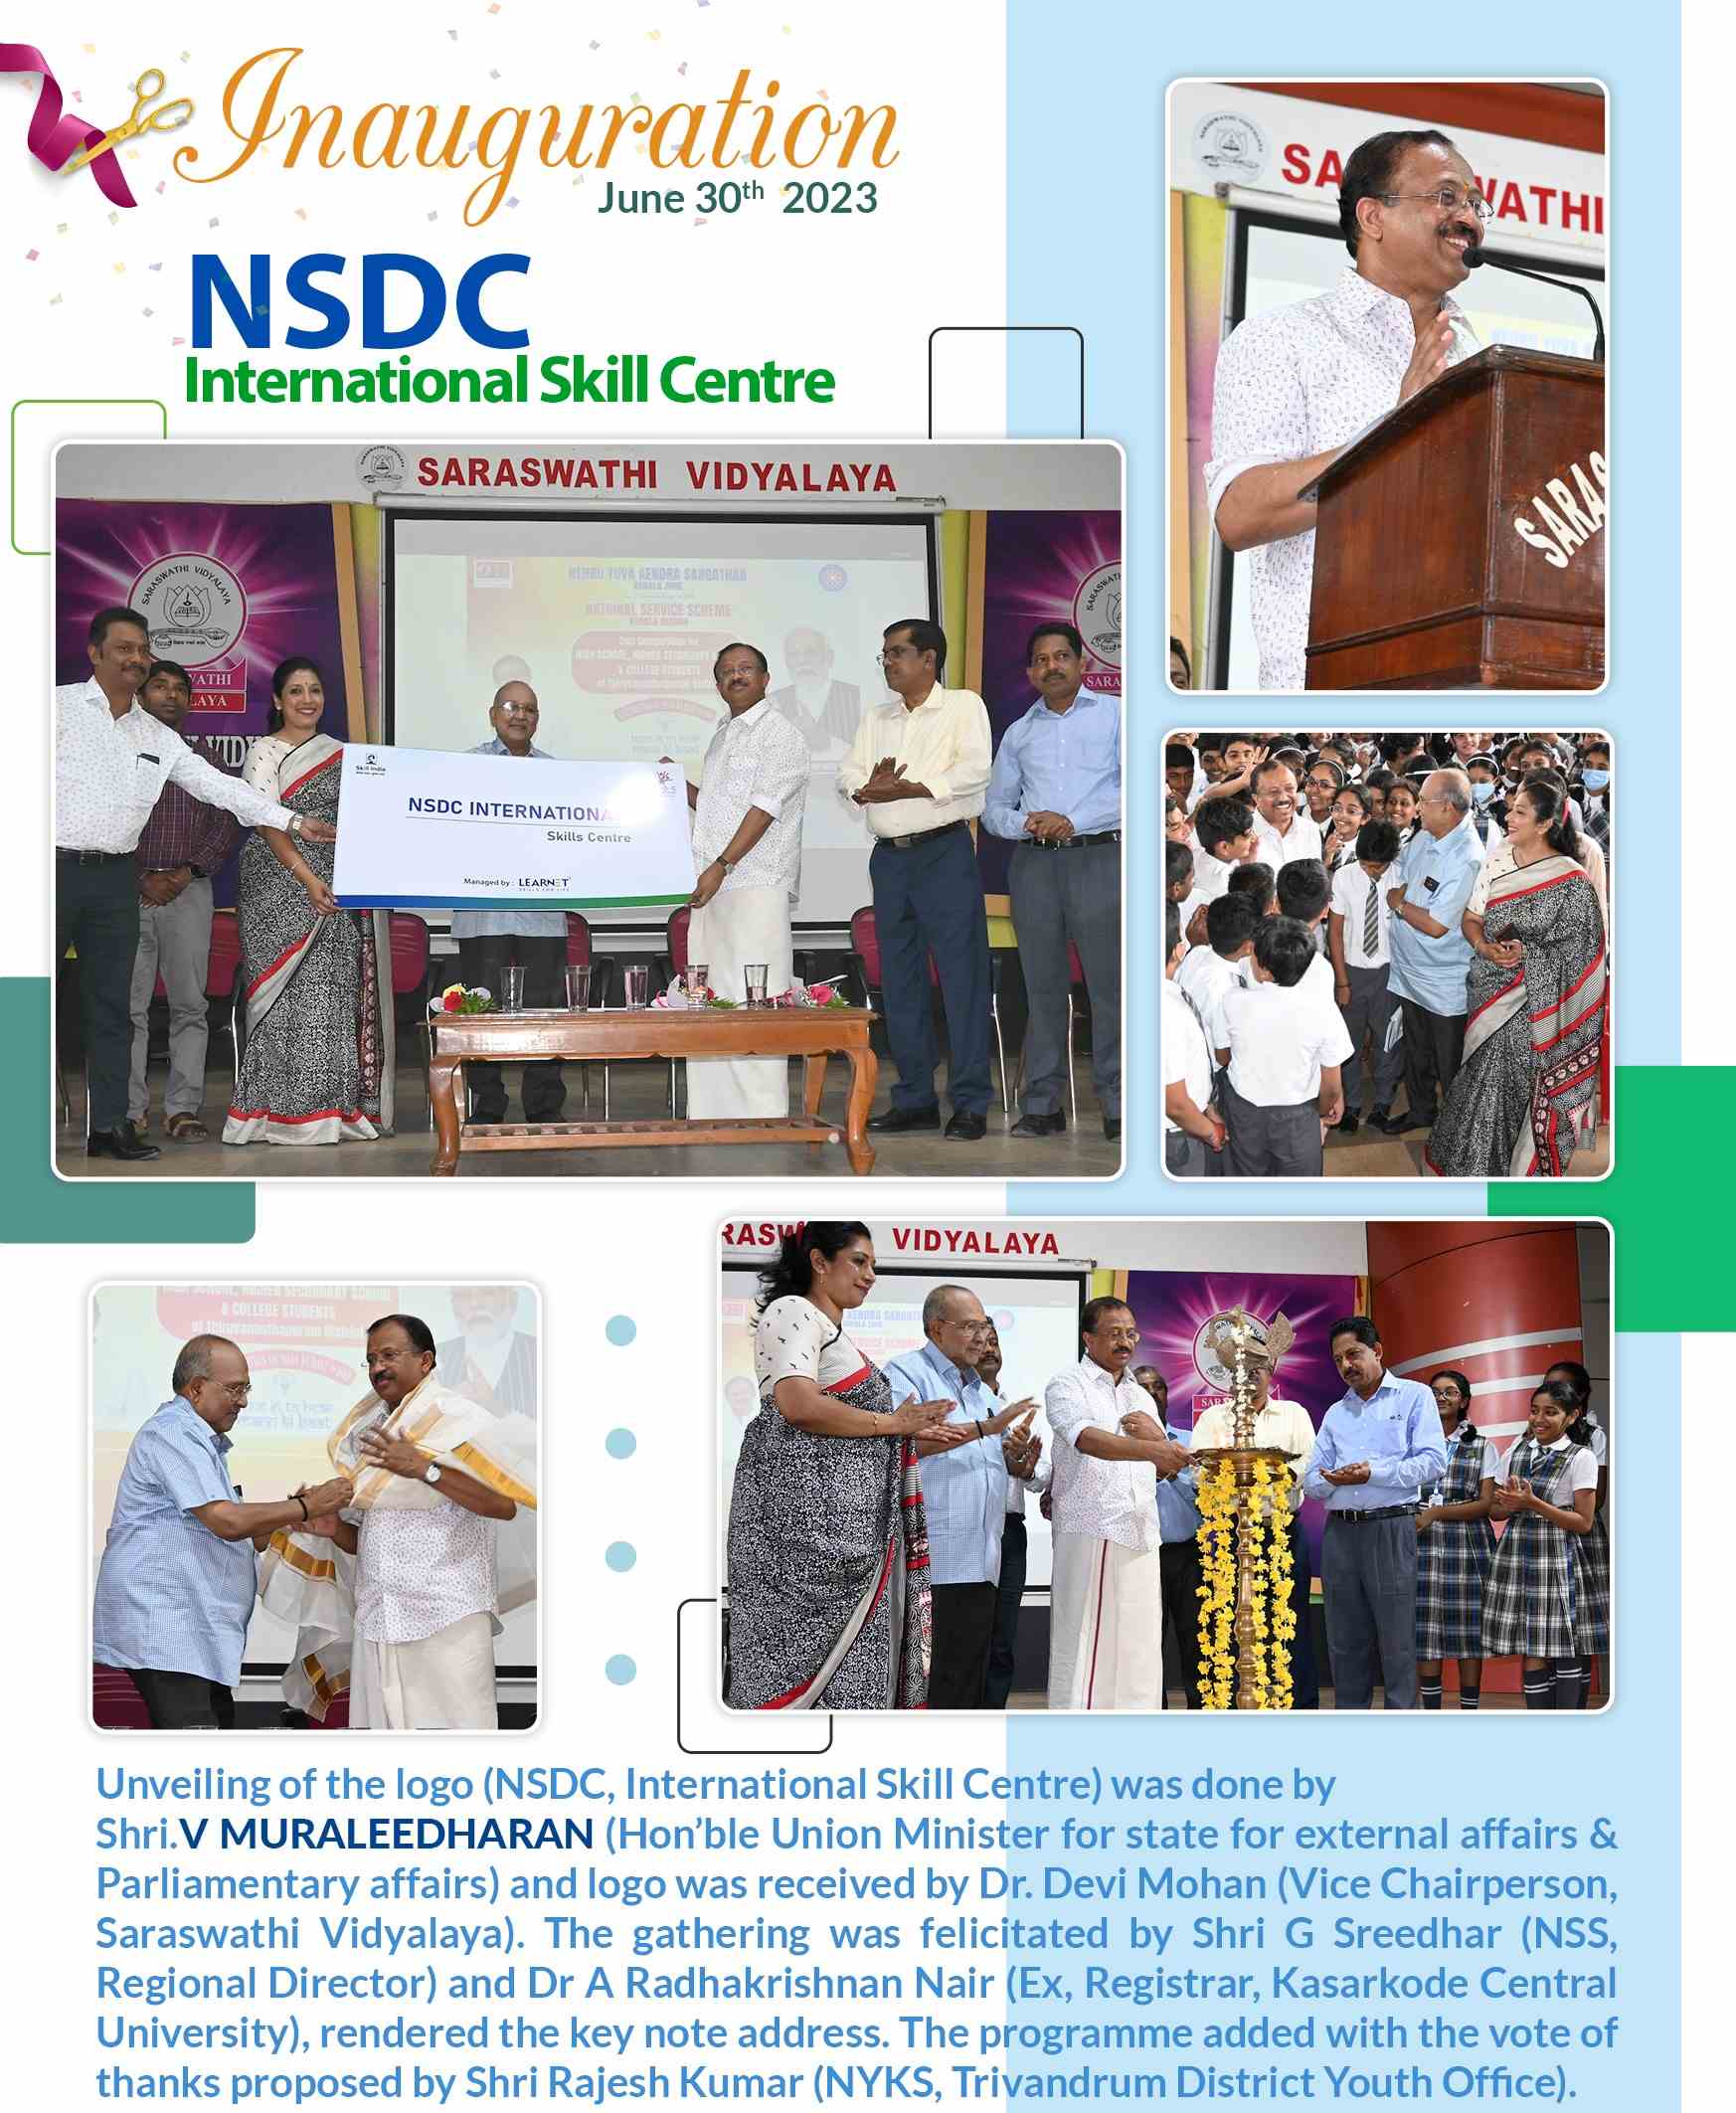 Unveiling of the logo (NSDC, International Skill Centre) was done by Shri V Muraleedharan (Hon’ble Union Minister for state for external affairs)